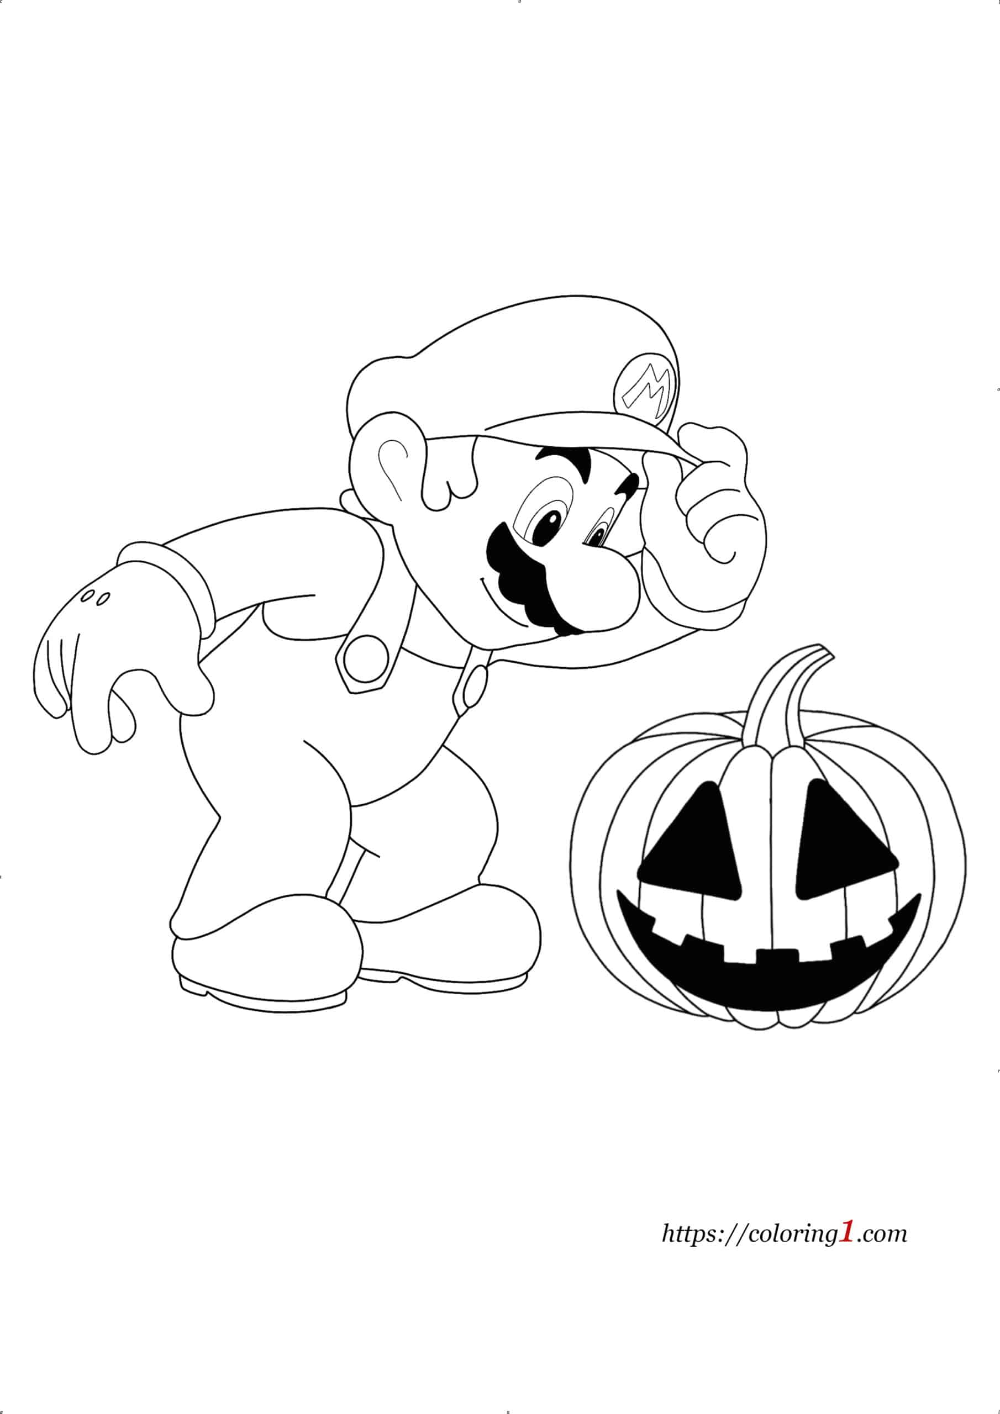 Mario Halloween Coloring Pages - 2 Free ...